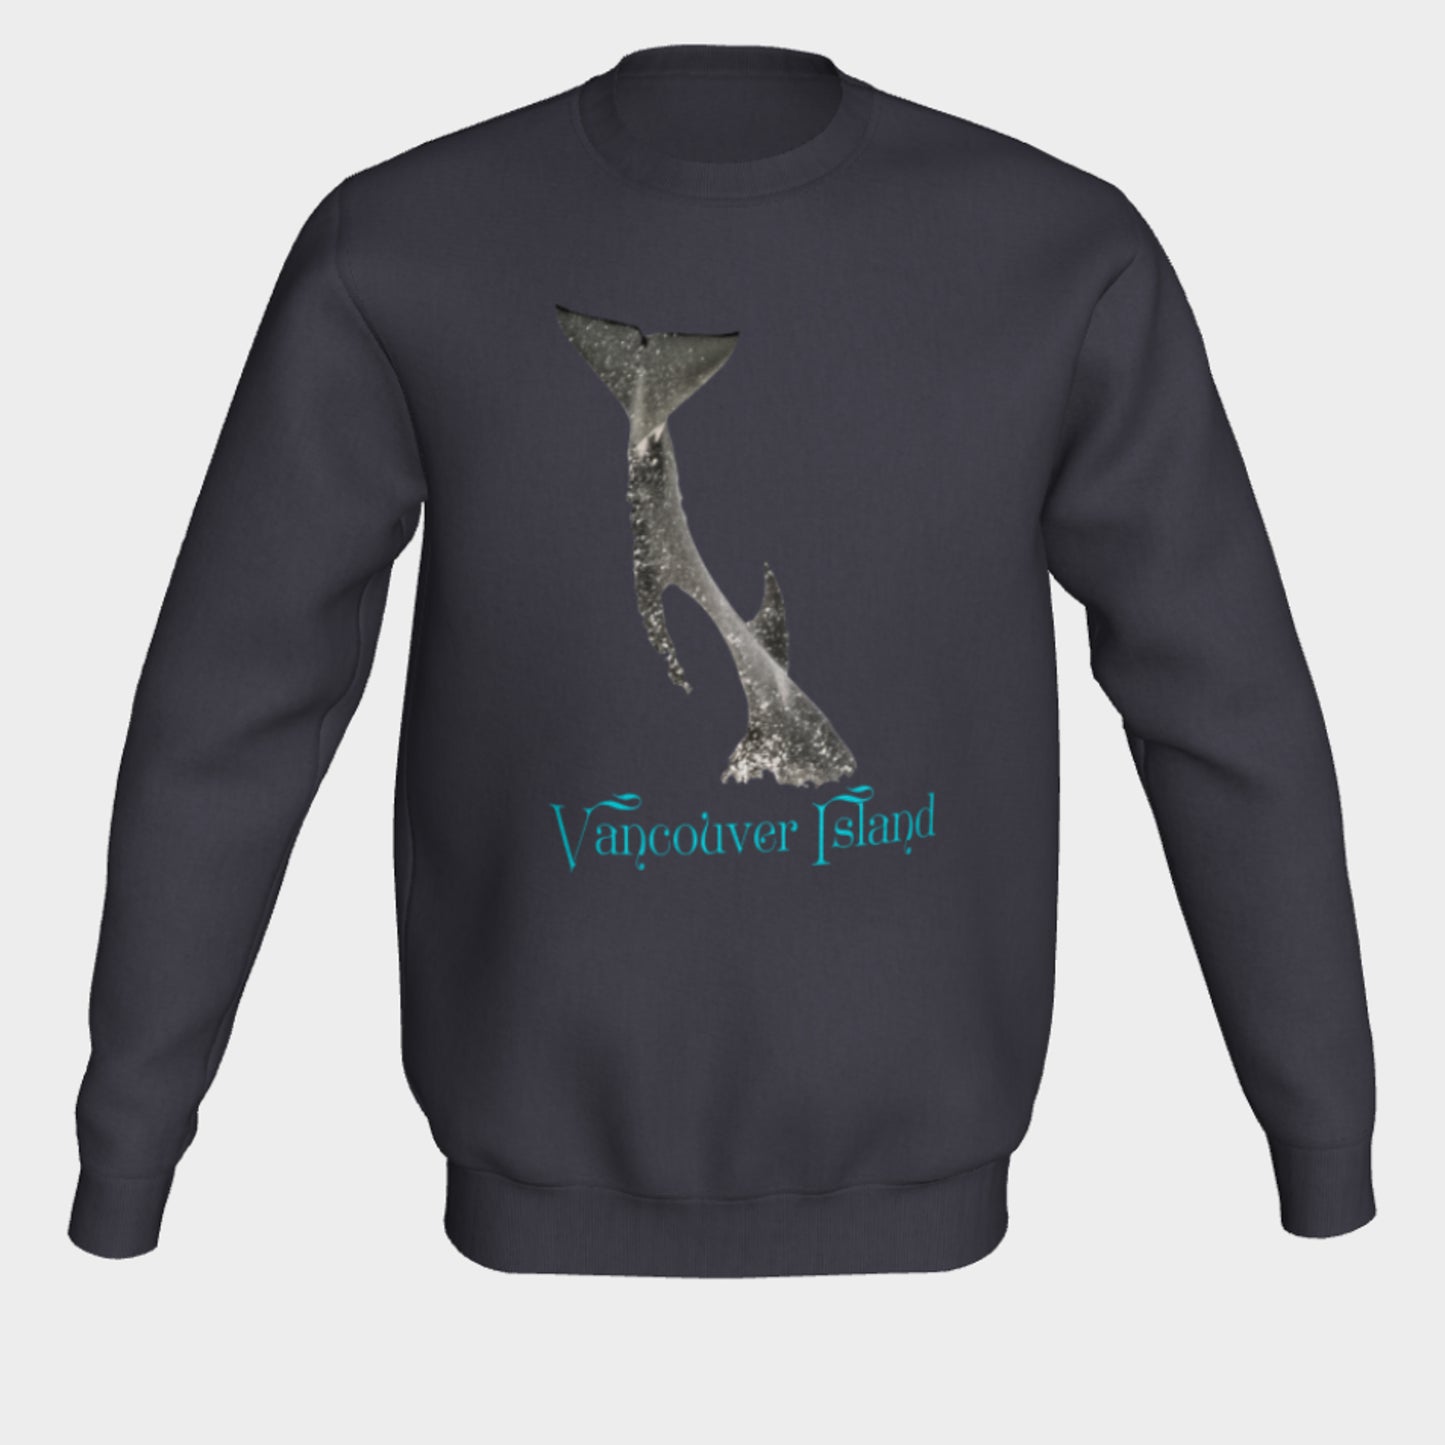 Orca Breach Vancouver Island Crewneck Sweatshirt What’s better than a super cozy sweatshirt? A super cozy sweatshirt from Van Isle Goddess!  Super cozy unisex sweatshirt for those chilly days.  Excellent for men or women.   Fit is roomy and comfortable. 